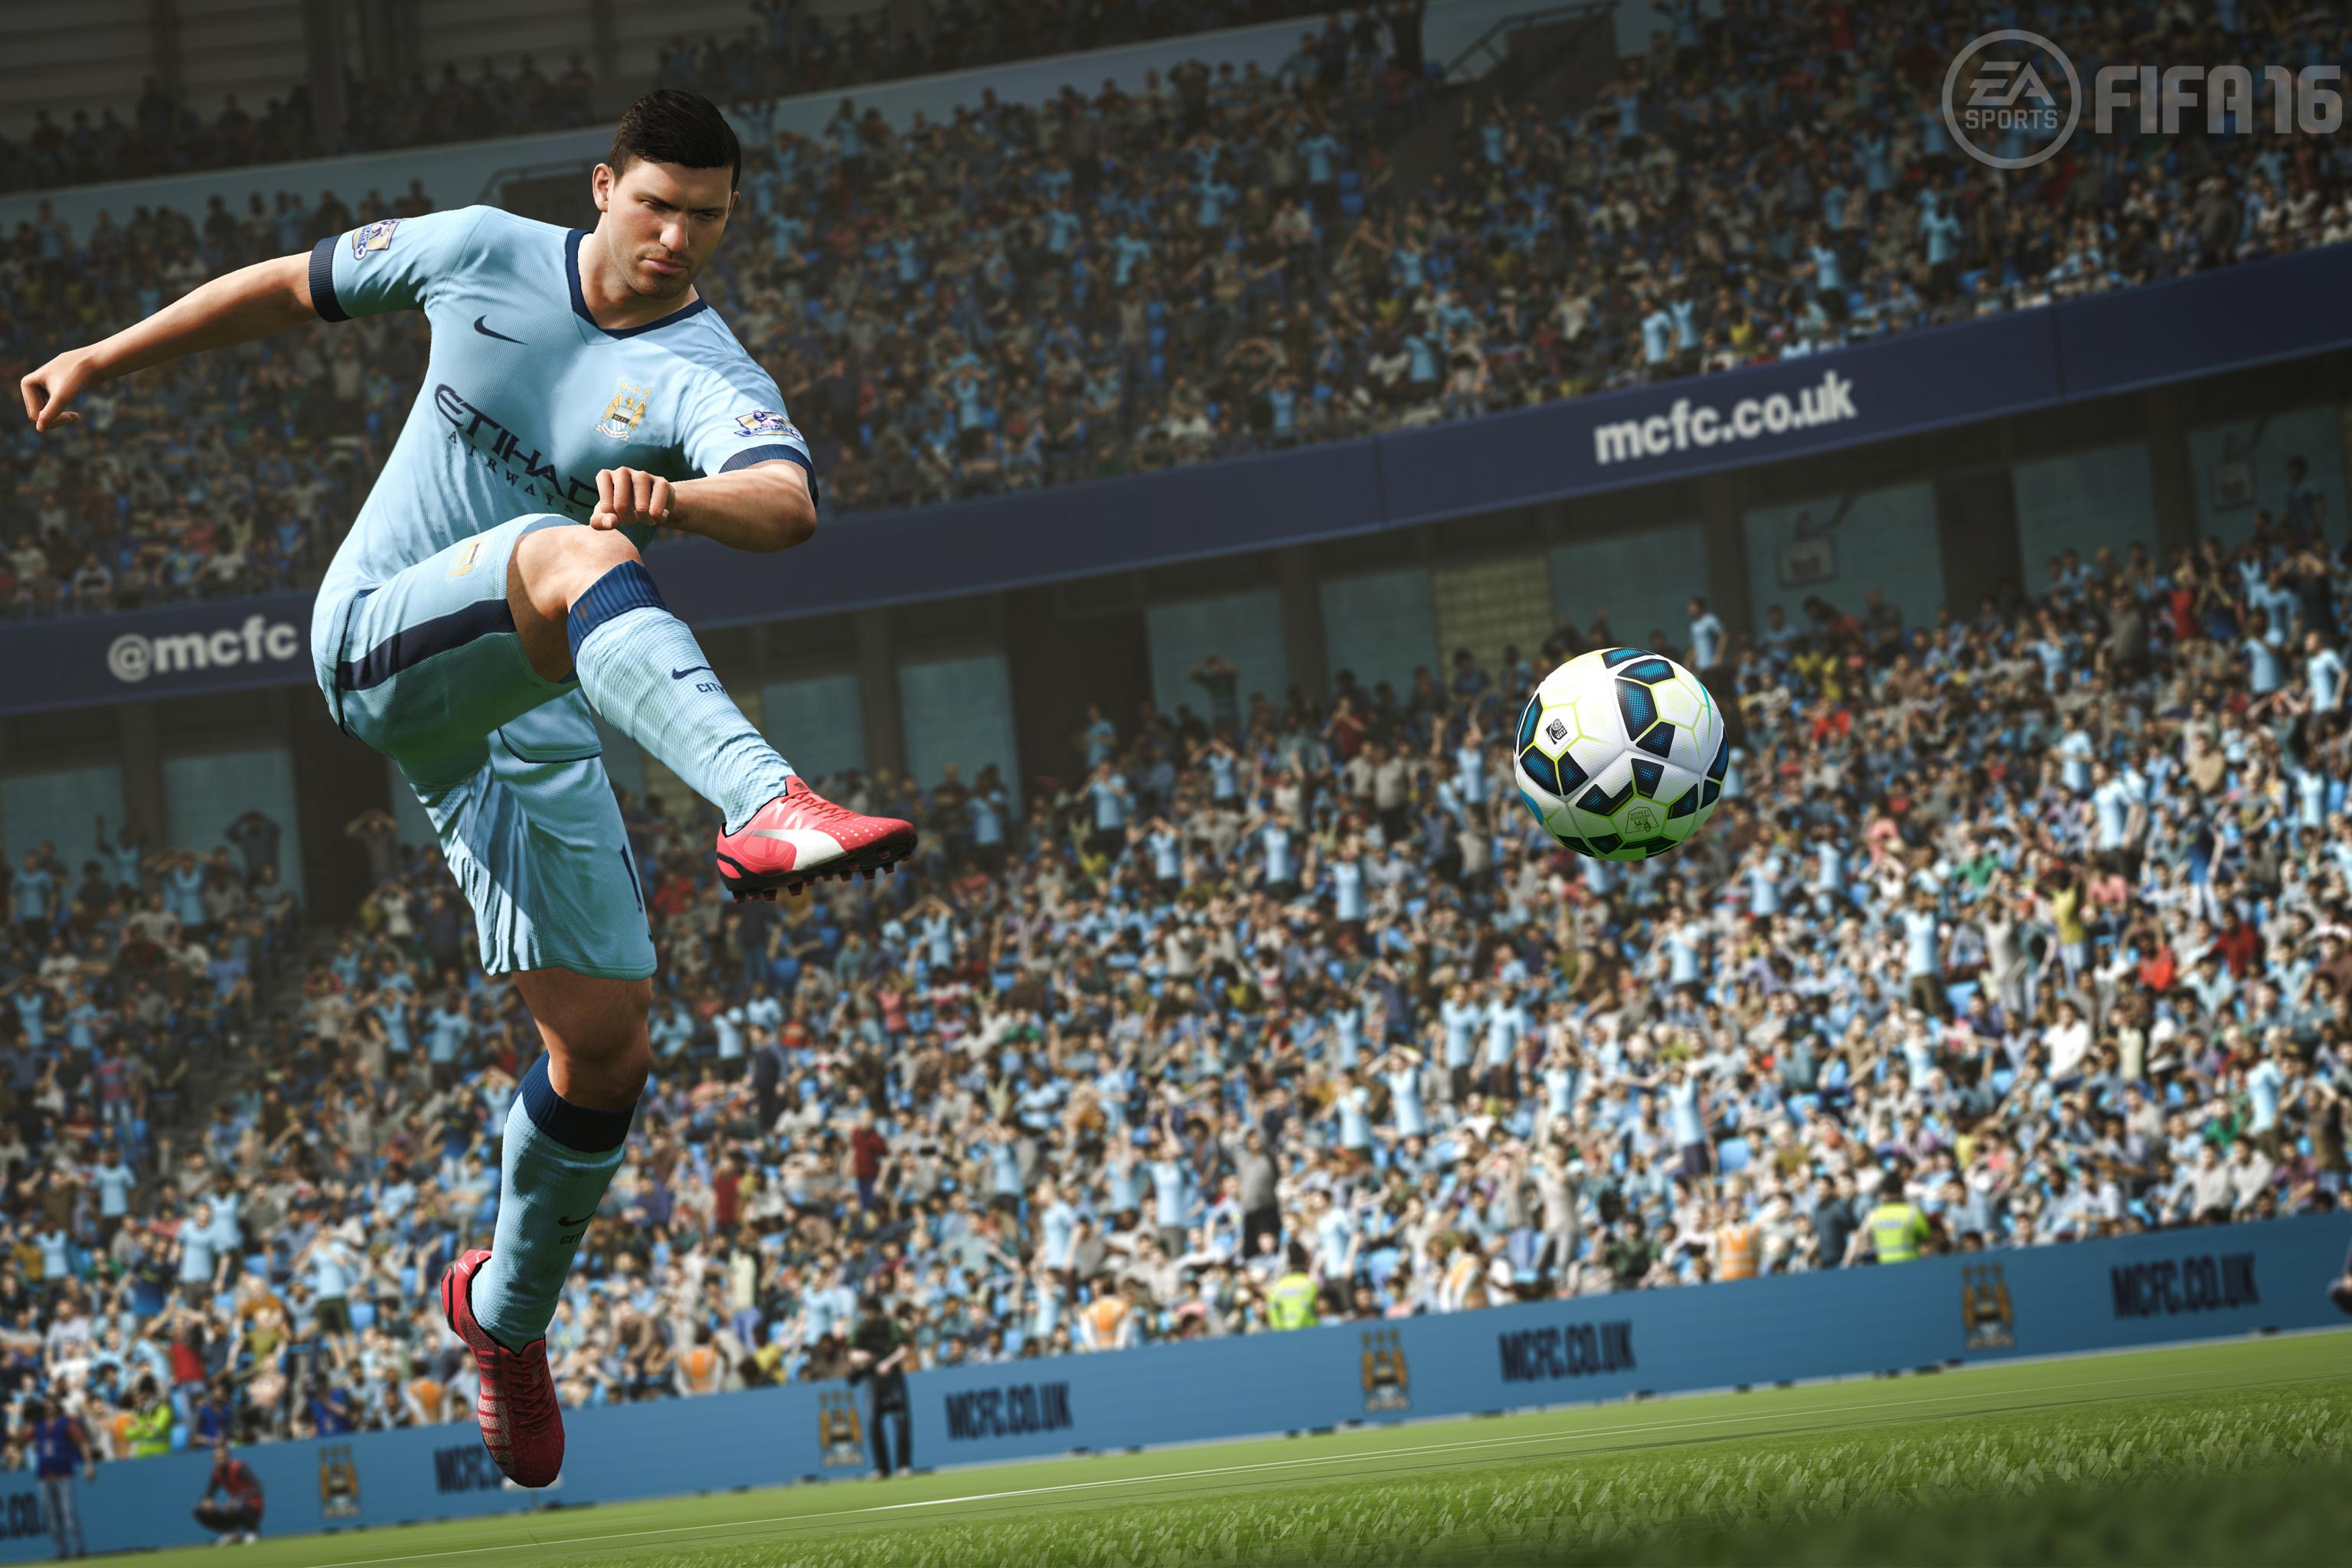 Fifa 16 Full Review Of The Game Bleacher Report Latest News Videos And Highlights